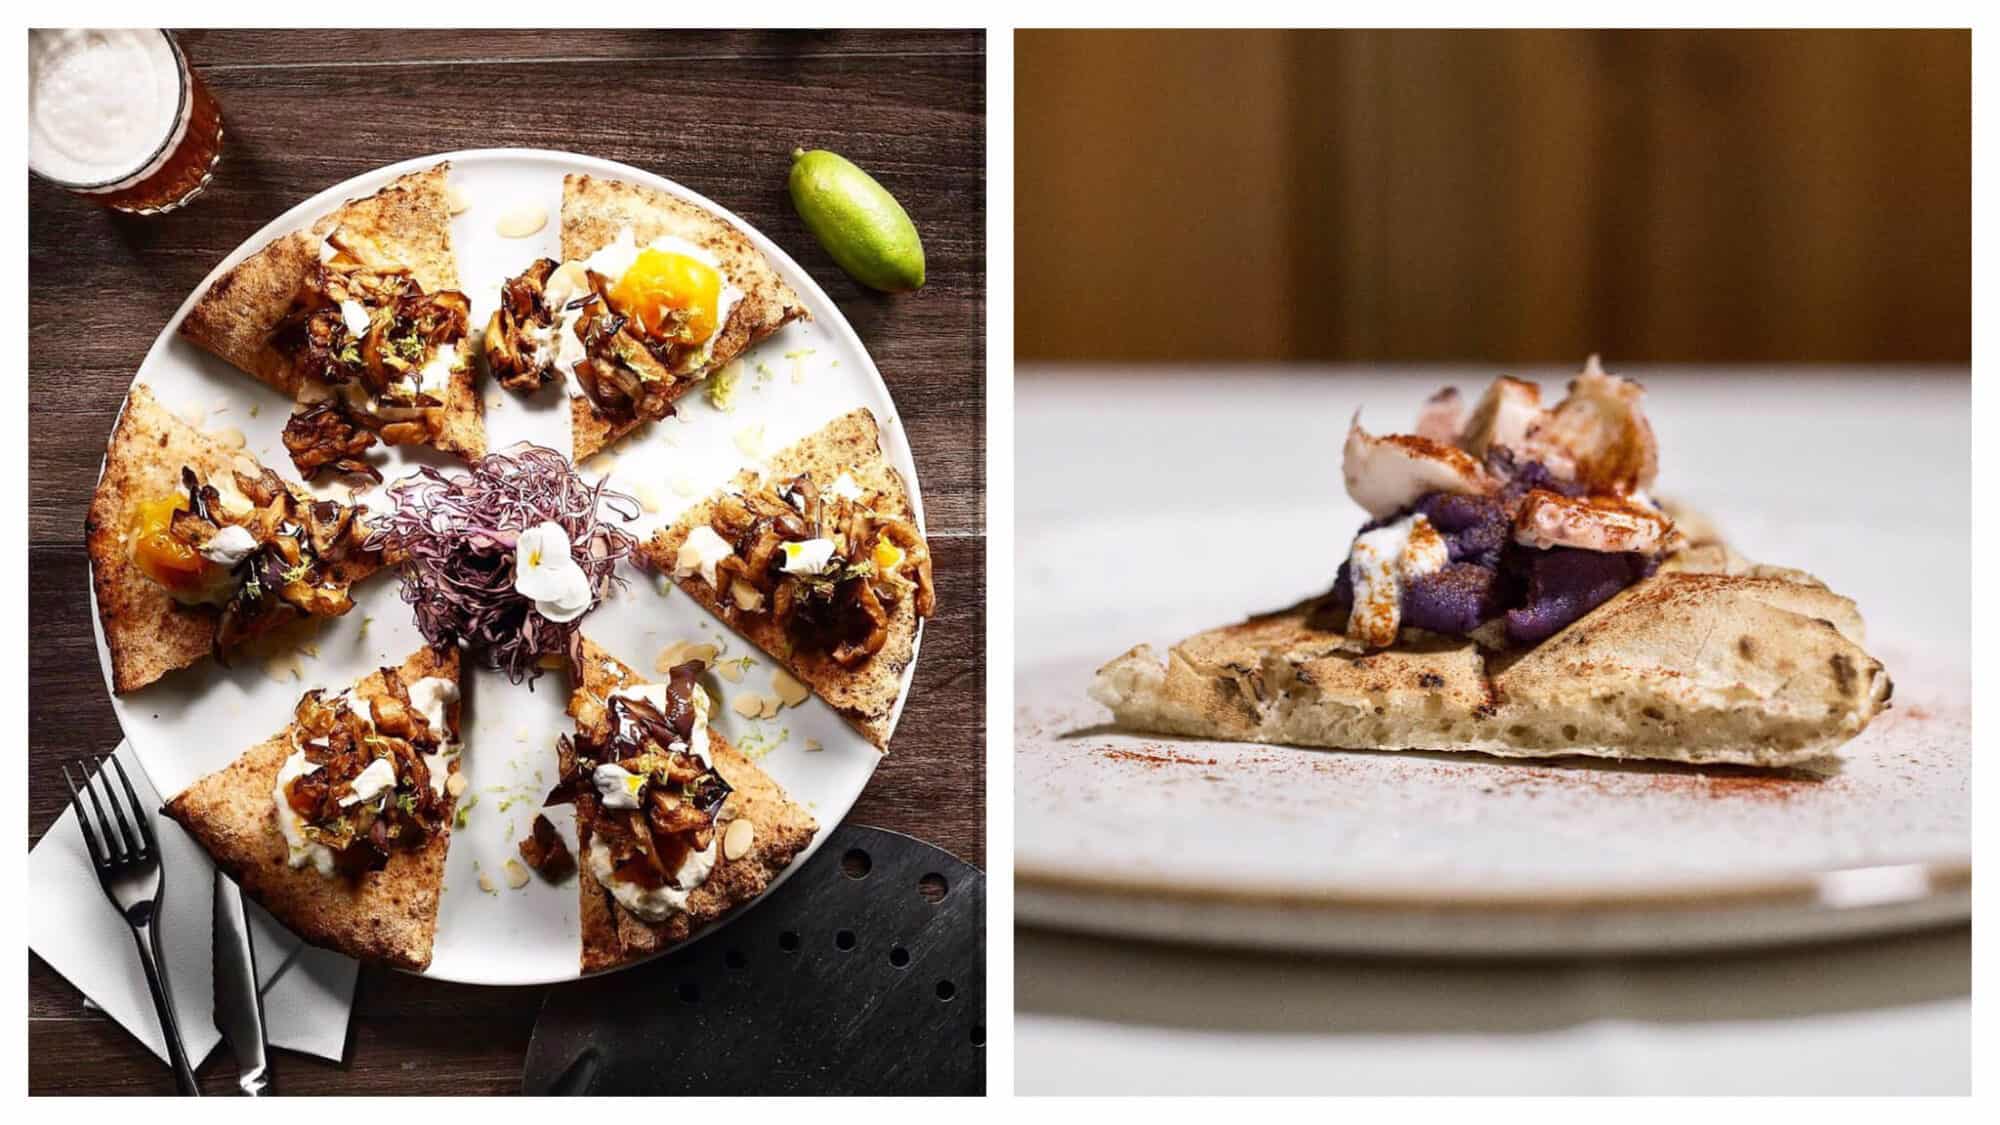 Left: a bird's eye view of individual slices of pizza on a plate with a knife and fork and a beer next to it. Right: a slice of pizza on a plate with a purple and white topping.